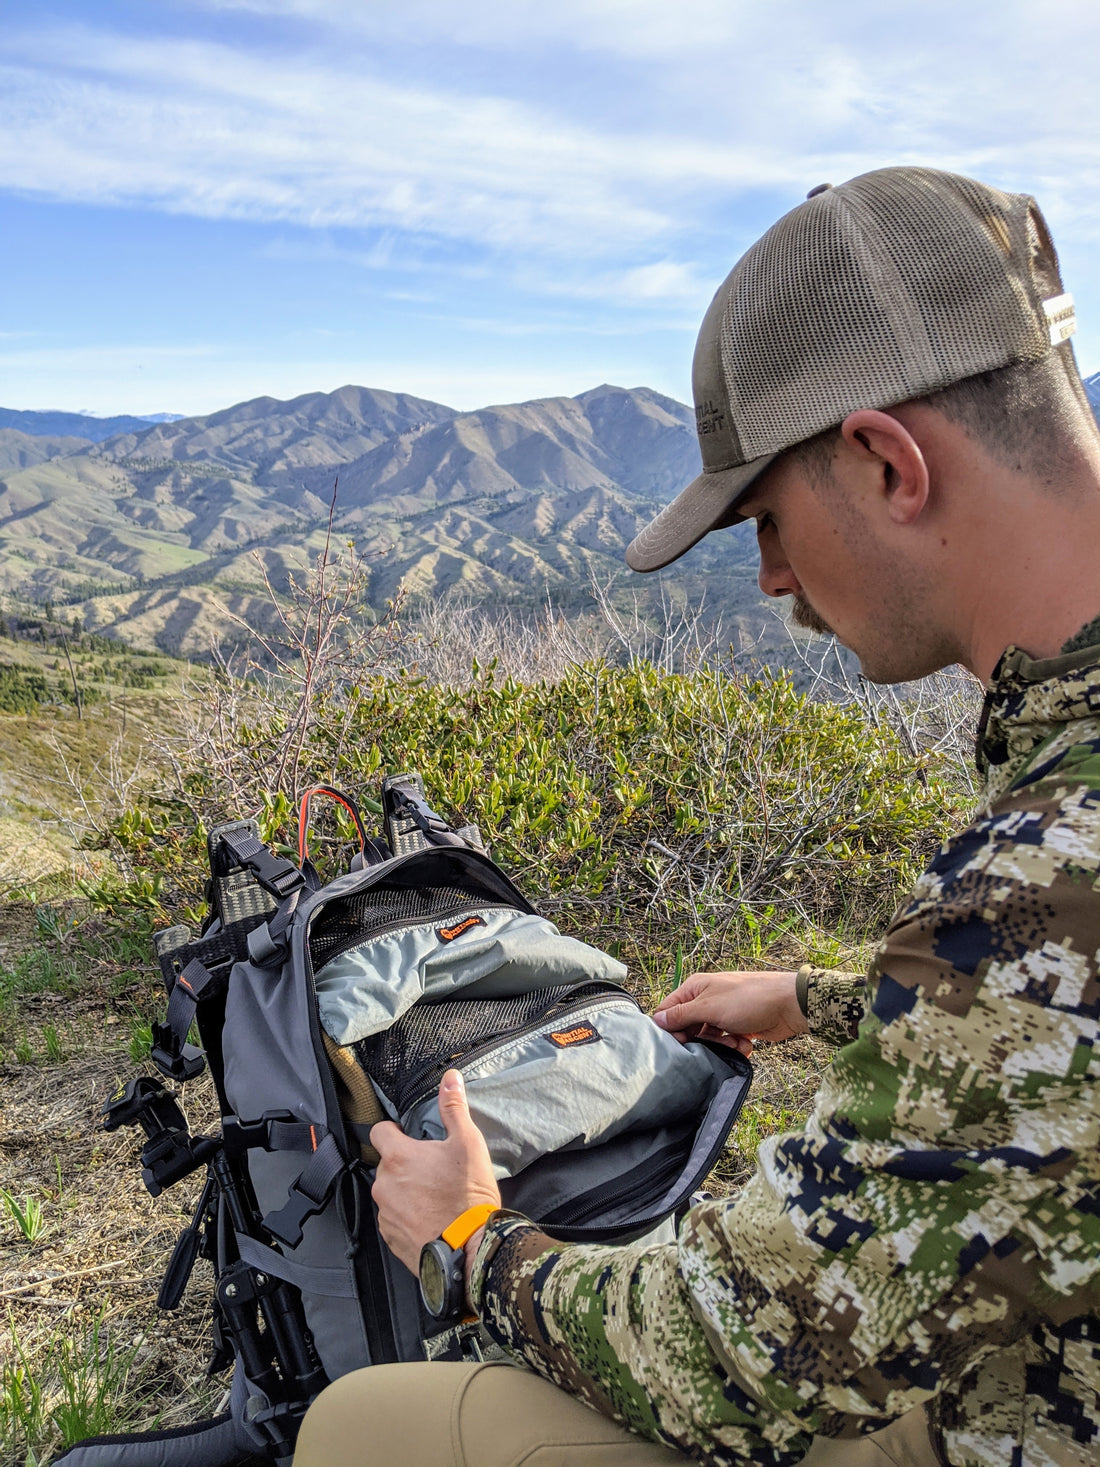 5 Tips to Stay Organized on Backcountry Hunts